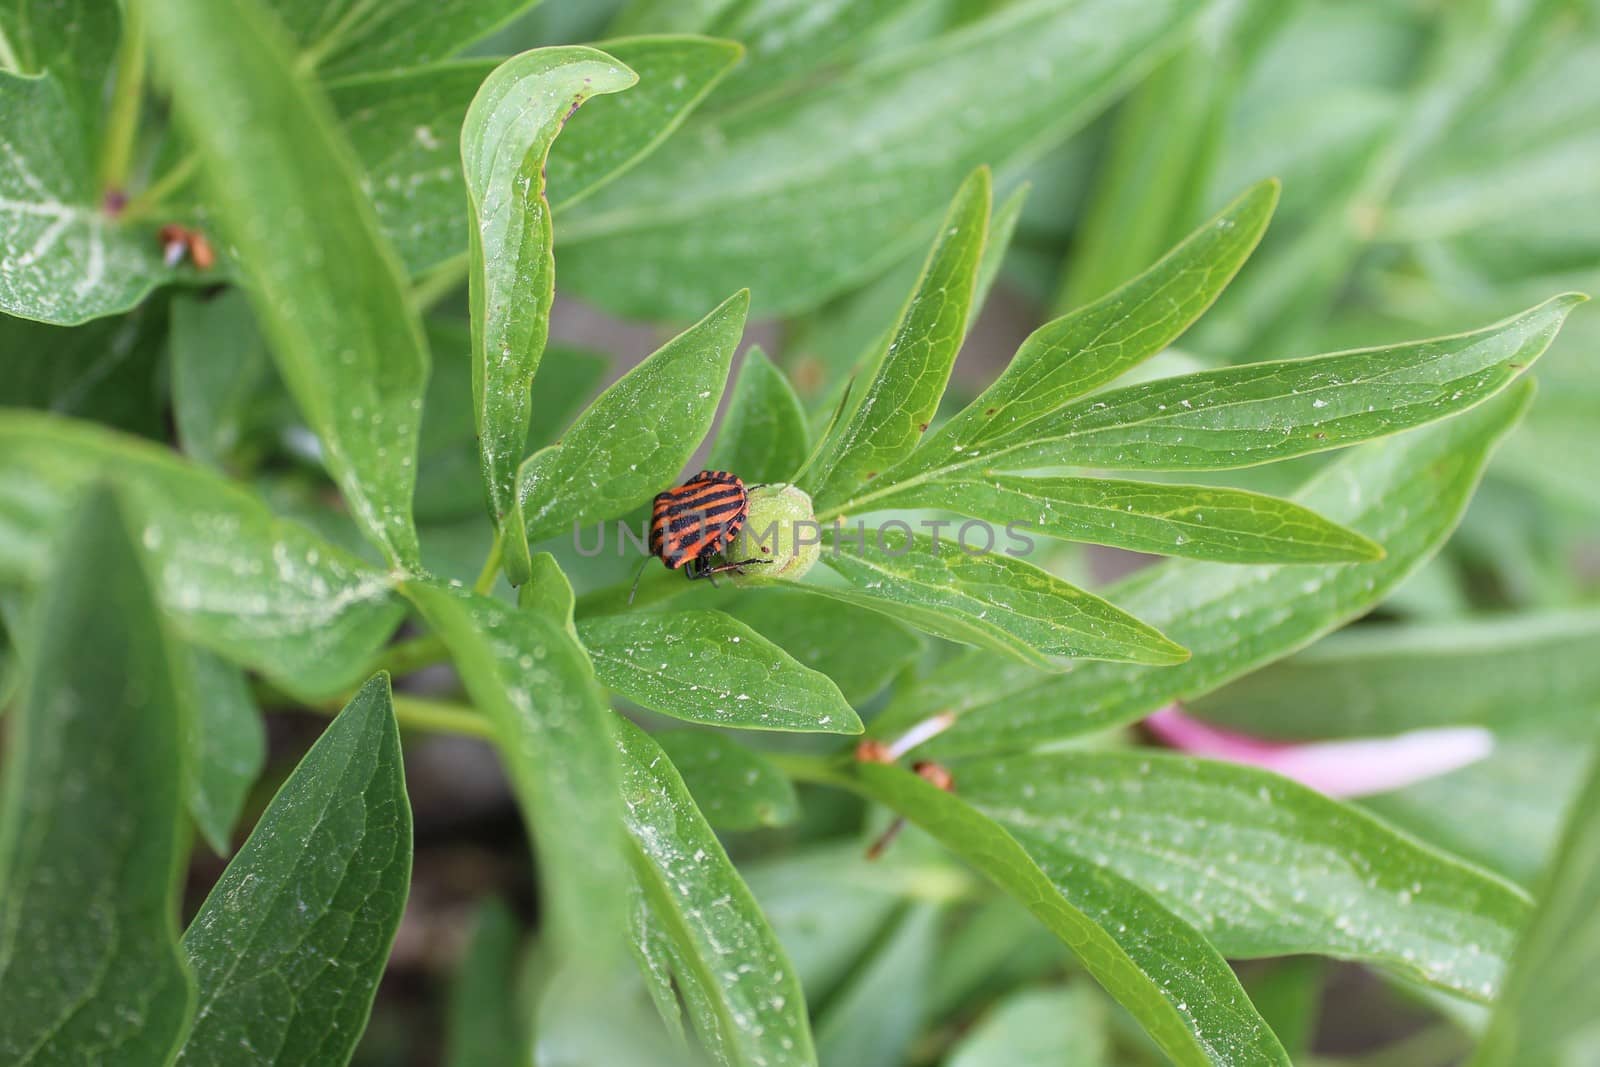 The picture shows a striped shield bug on a peony leaf.